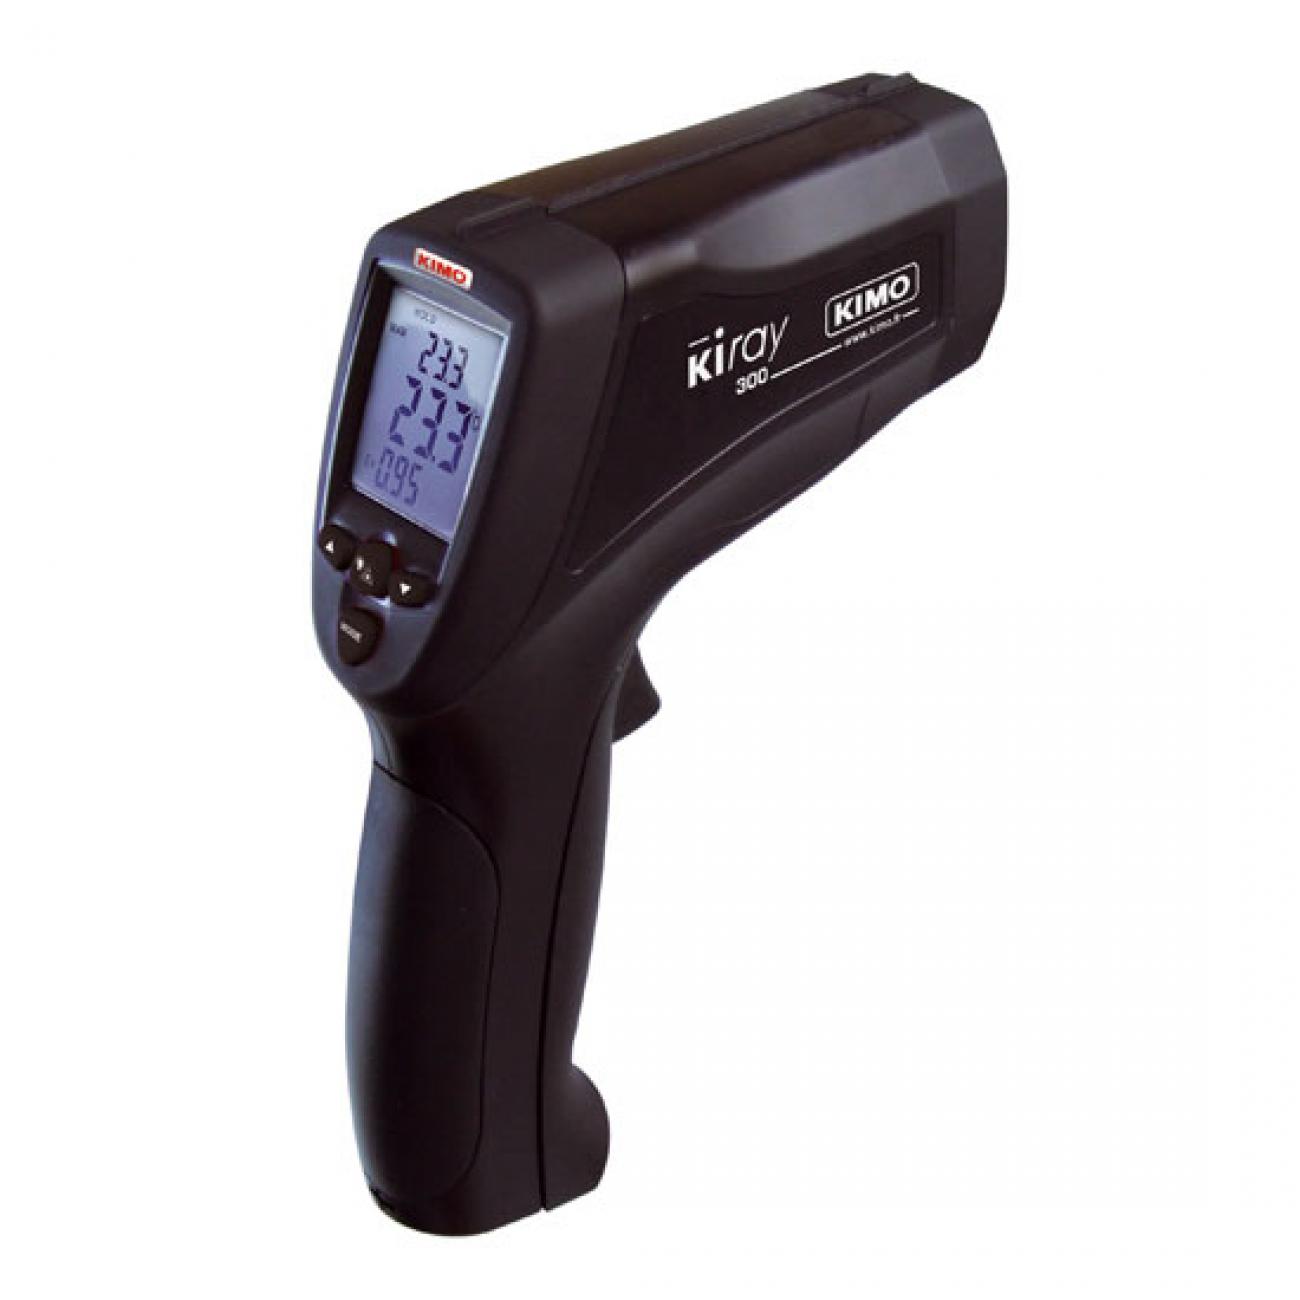 Portable Infrared thermometer